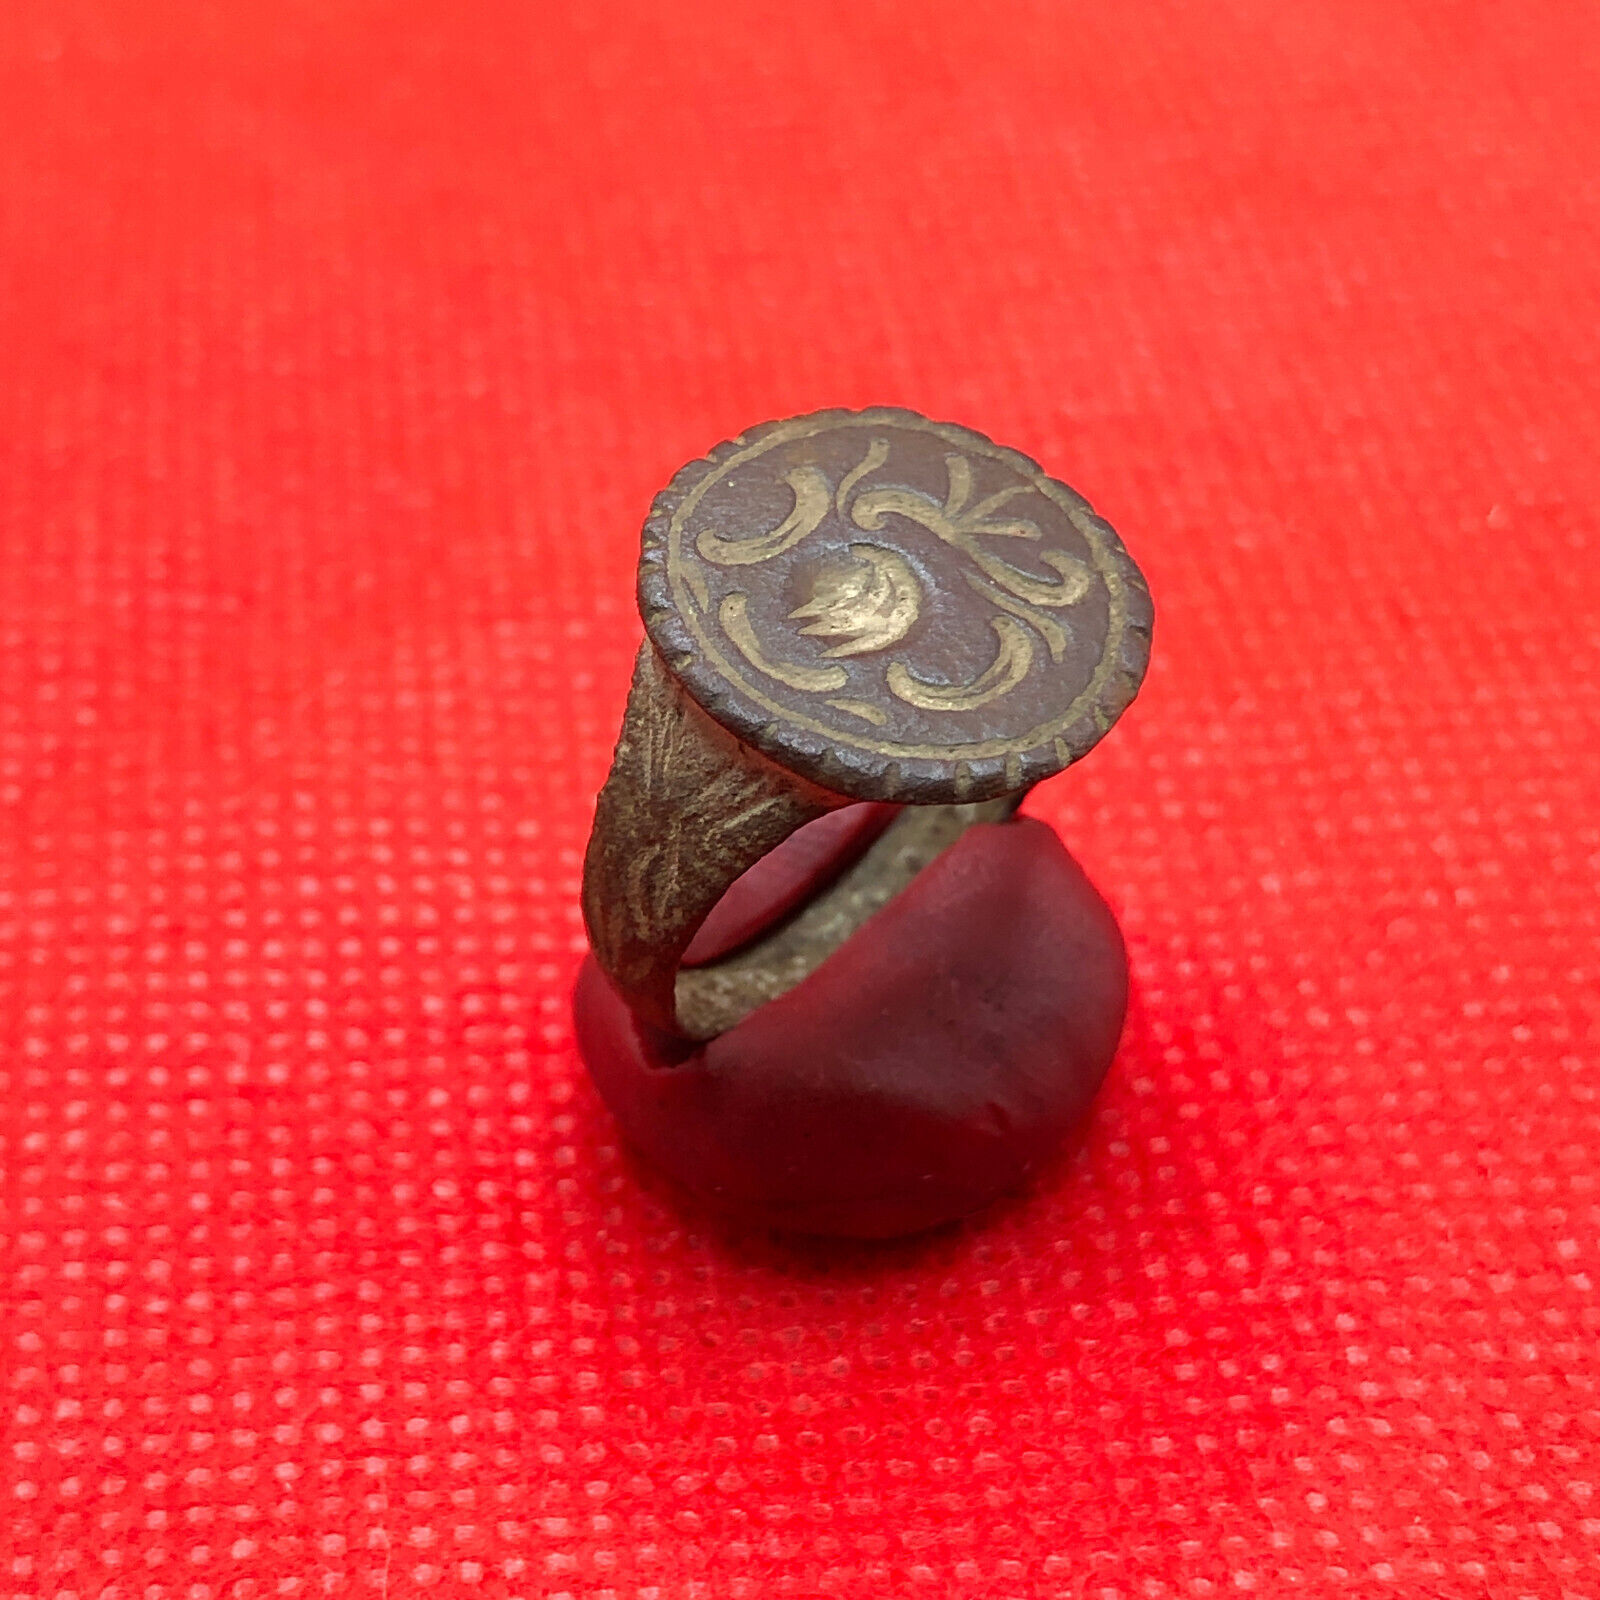 Rare Antique Bronze Ring of the Middle Ages Ancient Medieval Collectible Old